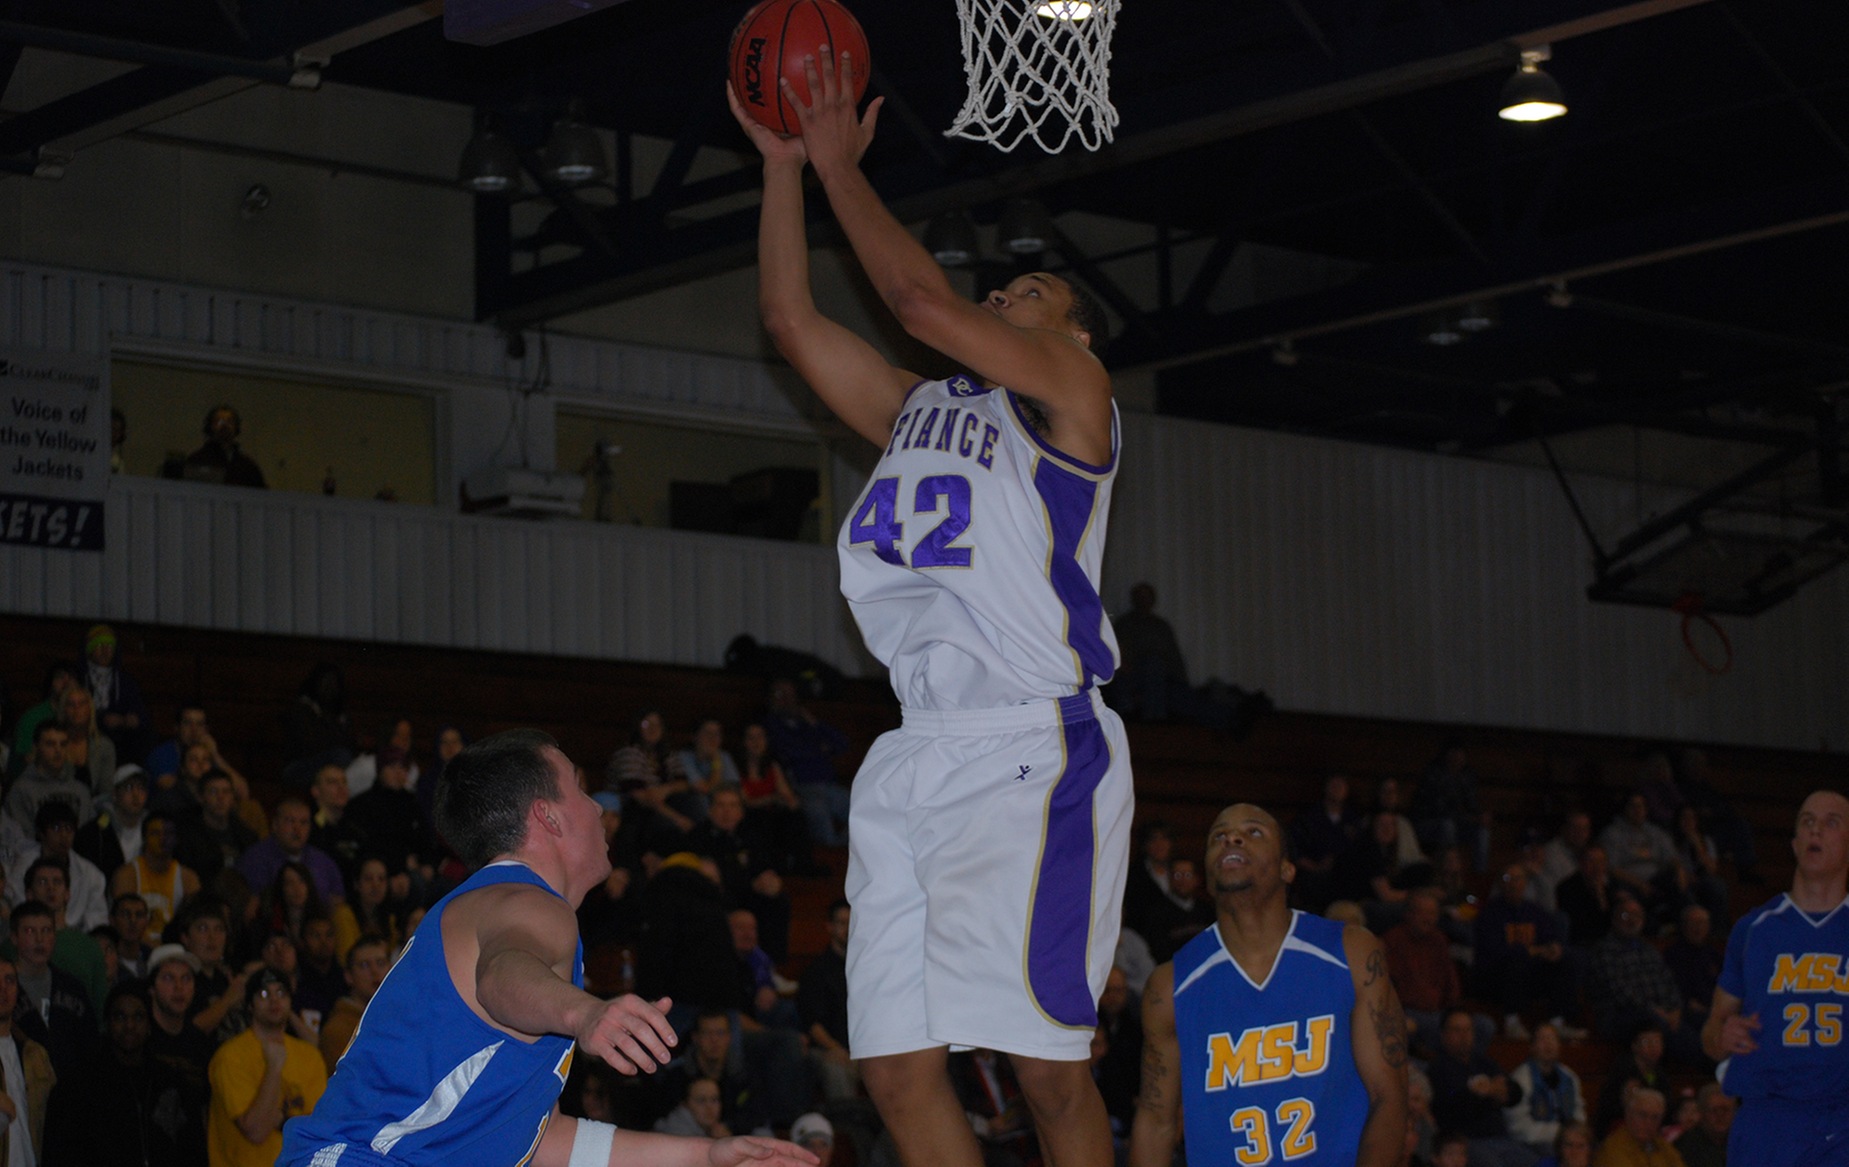 Defiance Tops Franklin to Grab Share of HCAC Lead